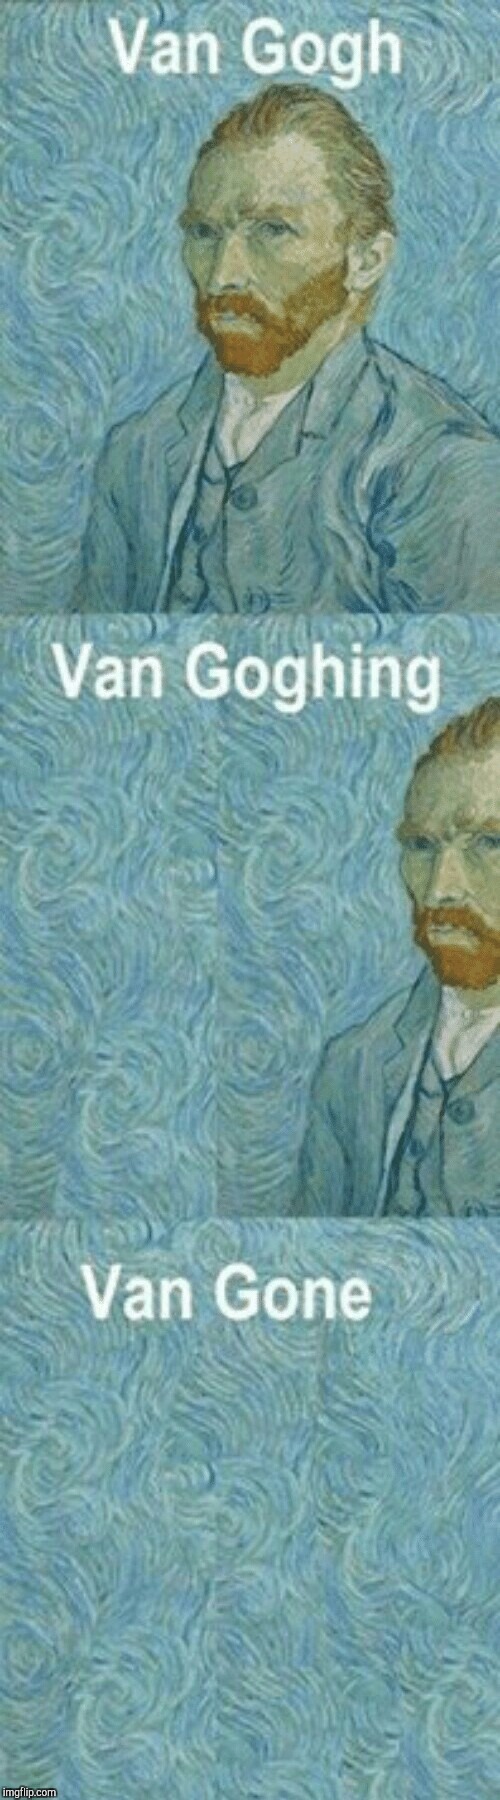 Thanks so much to everyone for making Art Week awesome! Sorry I if I missed some of your memes. Art Week 2.0 is a future must!  | . | image tagged in art week,jbmemegeek,van gogh,sir_unknown | made w/ Imgflip meme maker